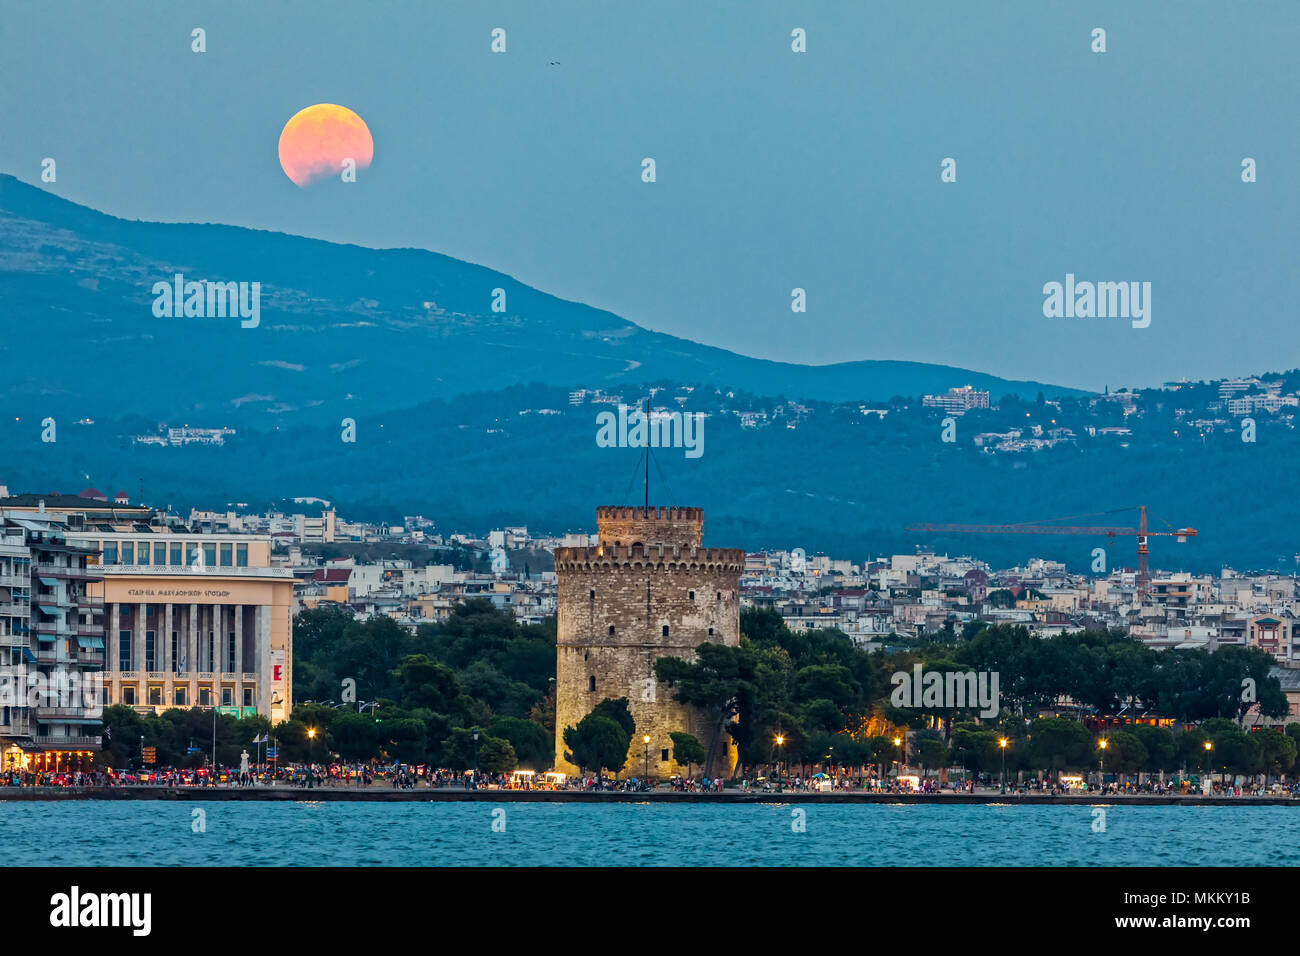 Thessaloniki, Greece -  August 7, 2017: Full Blood Moon and Eclipse Oven White Tower of Thessaloniki, Greece Stock Photo